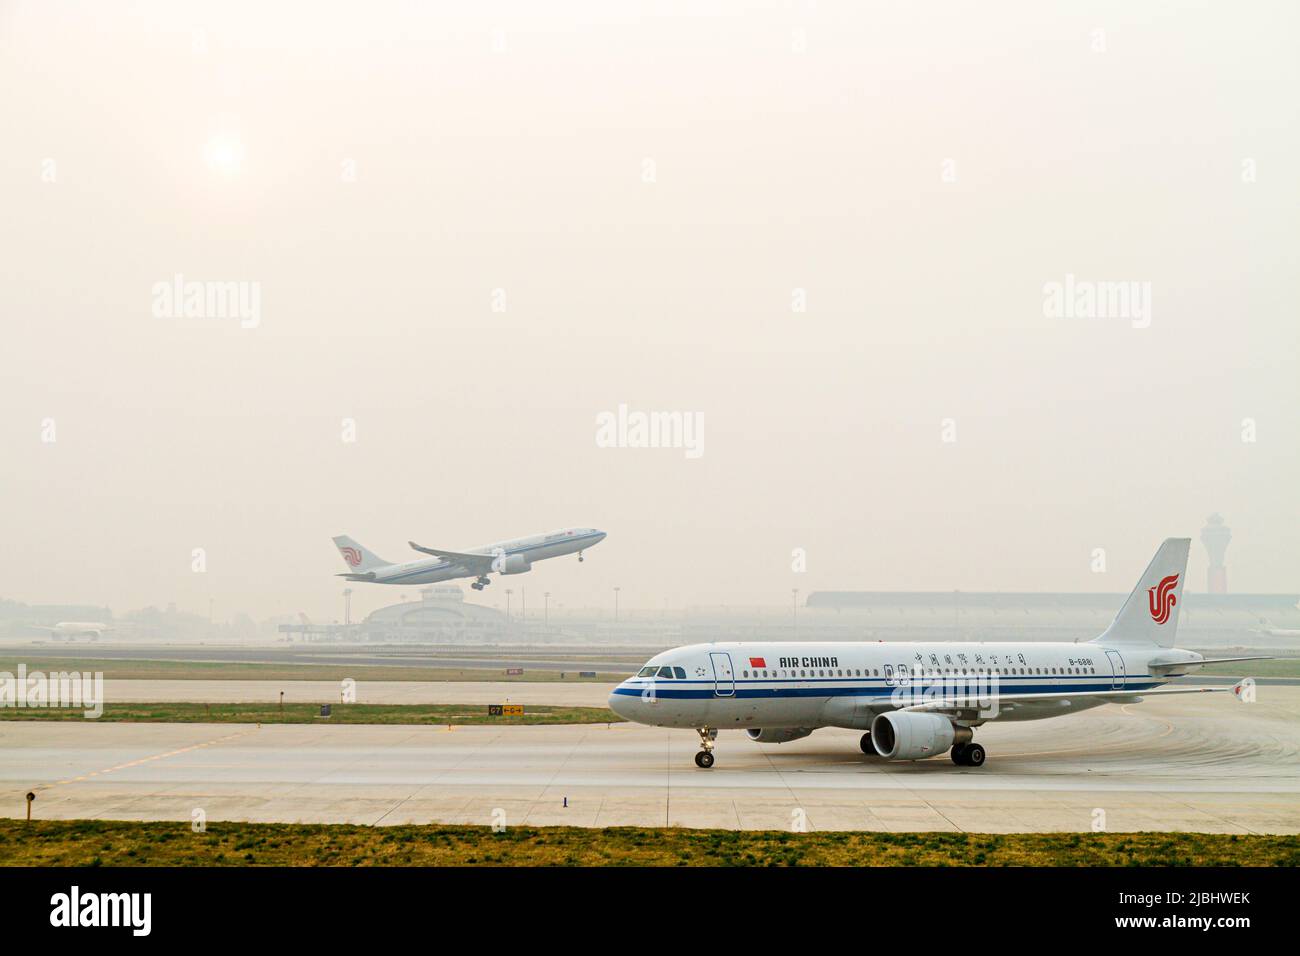 Beijing China,Chinese Beijing Capital International Airport commercial airliner airplane,smog pollution Air China runway taking off departing flight Stock Photo